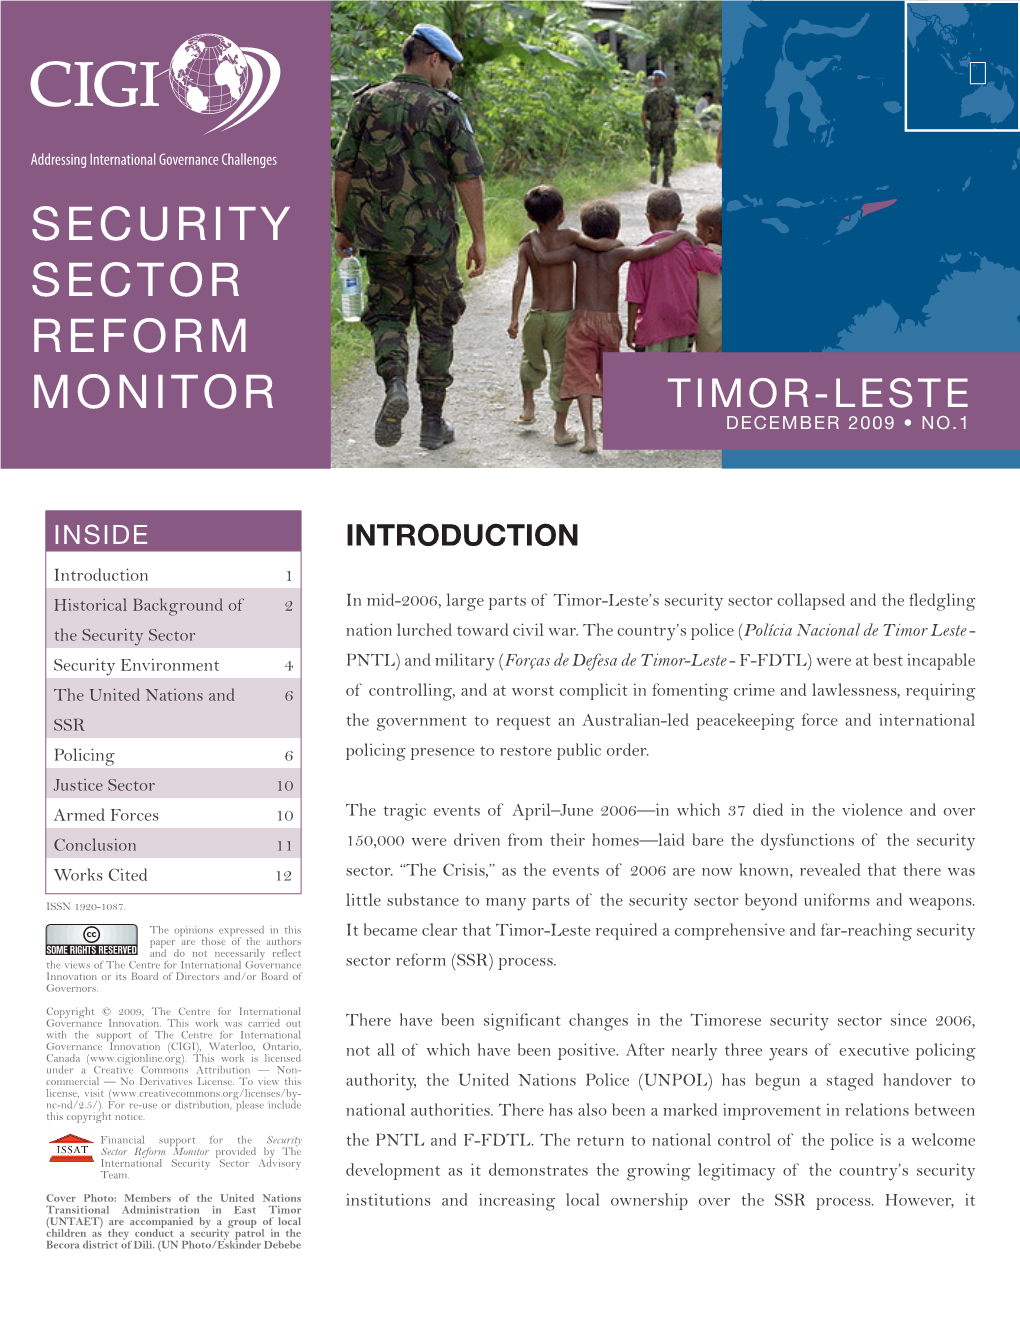 Timor-Leste’S Security Sector Collapsed and the Fledgling the Security Sector Nation Lurched Toward Civil War